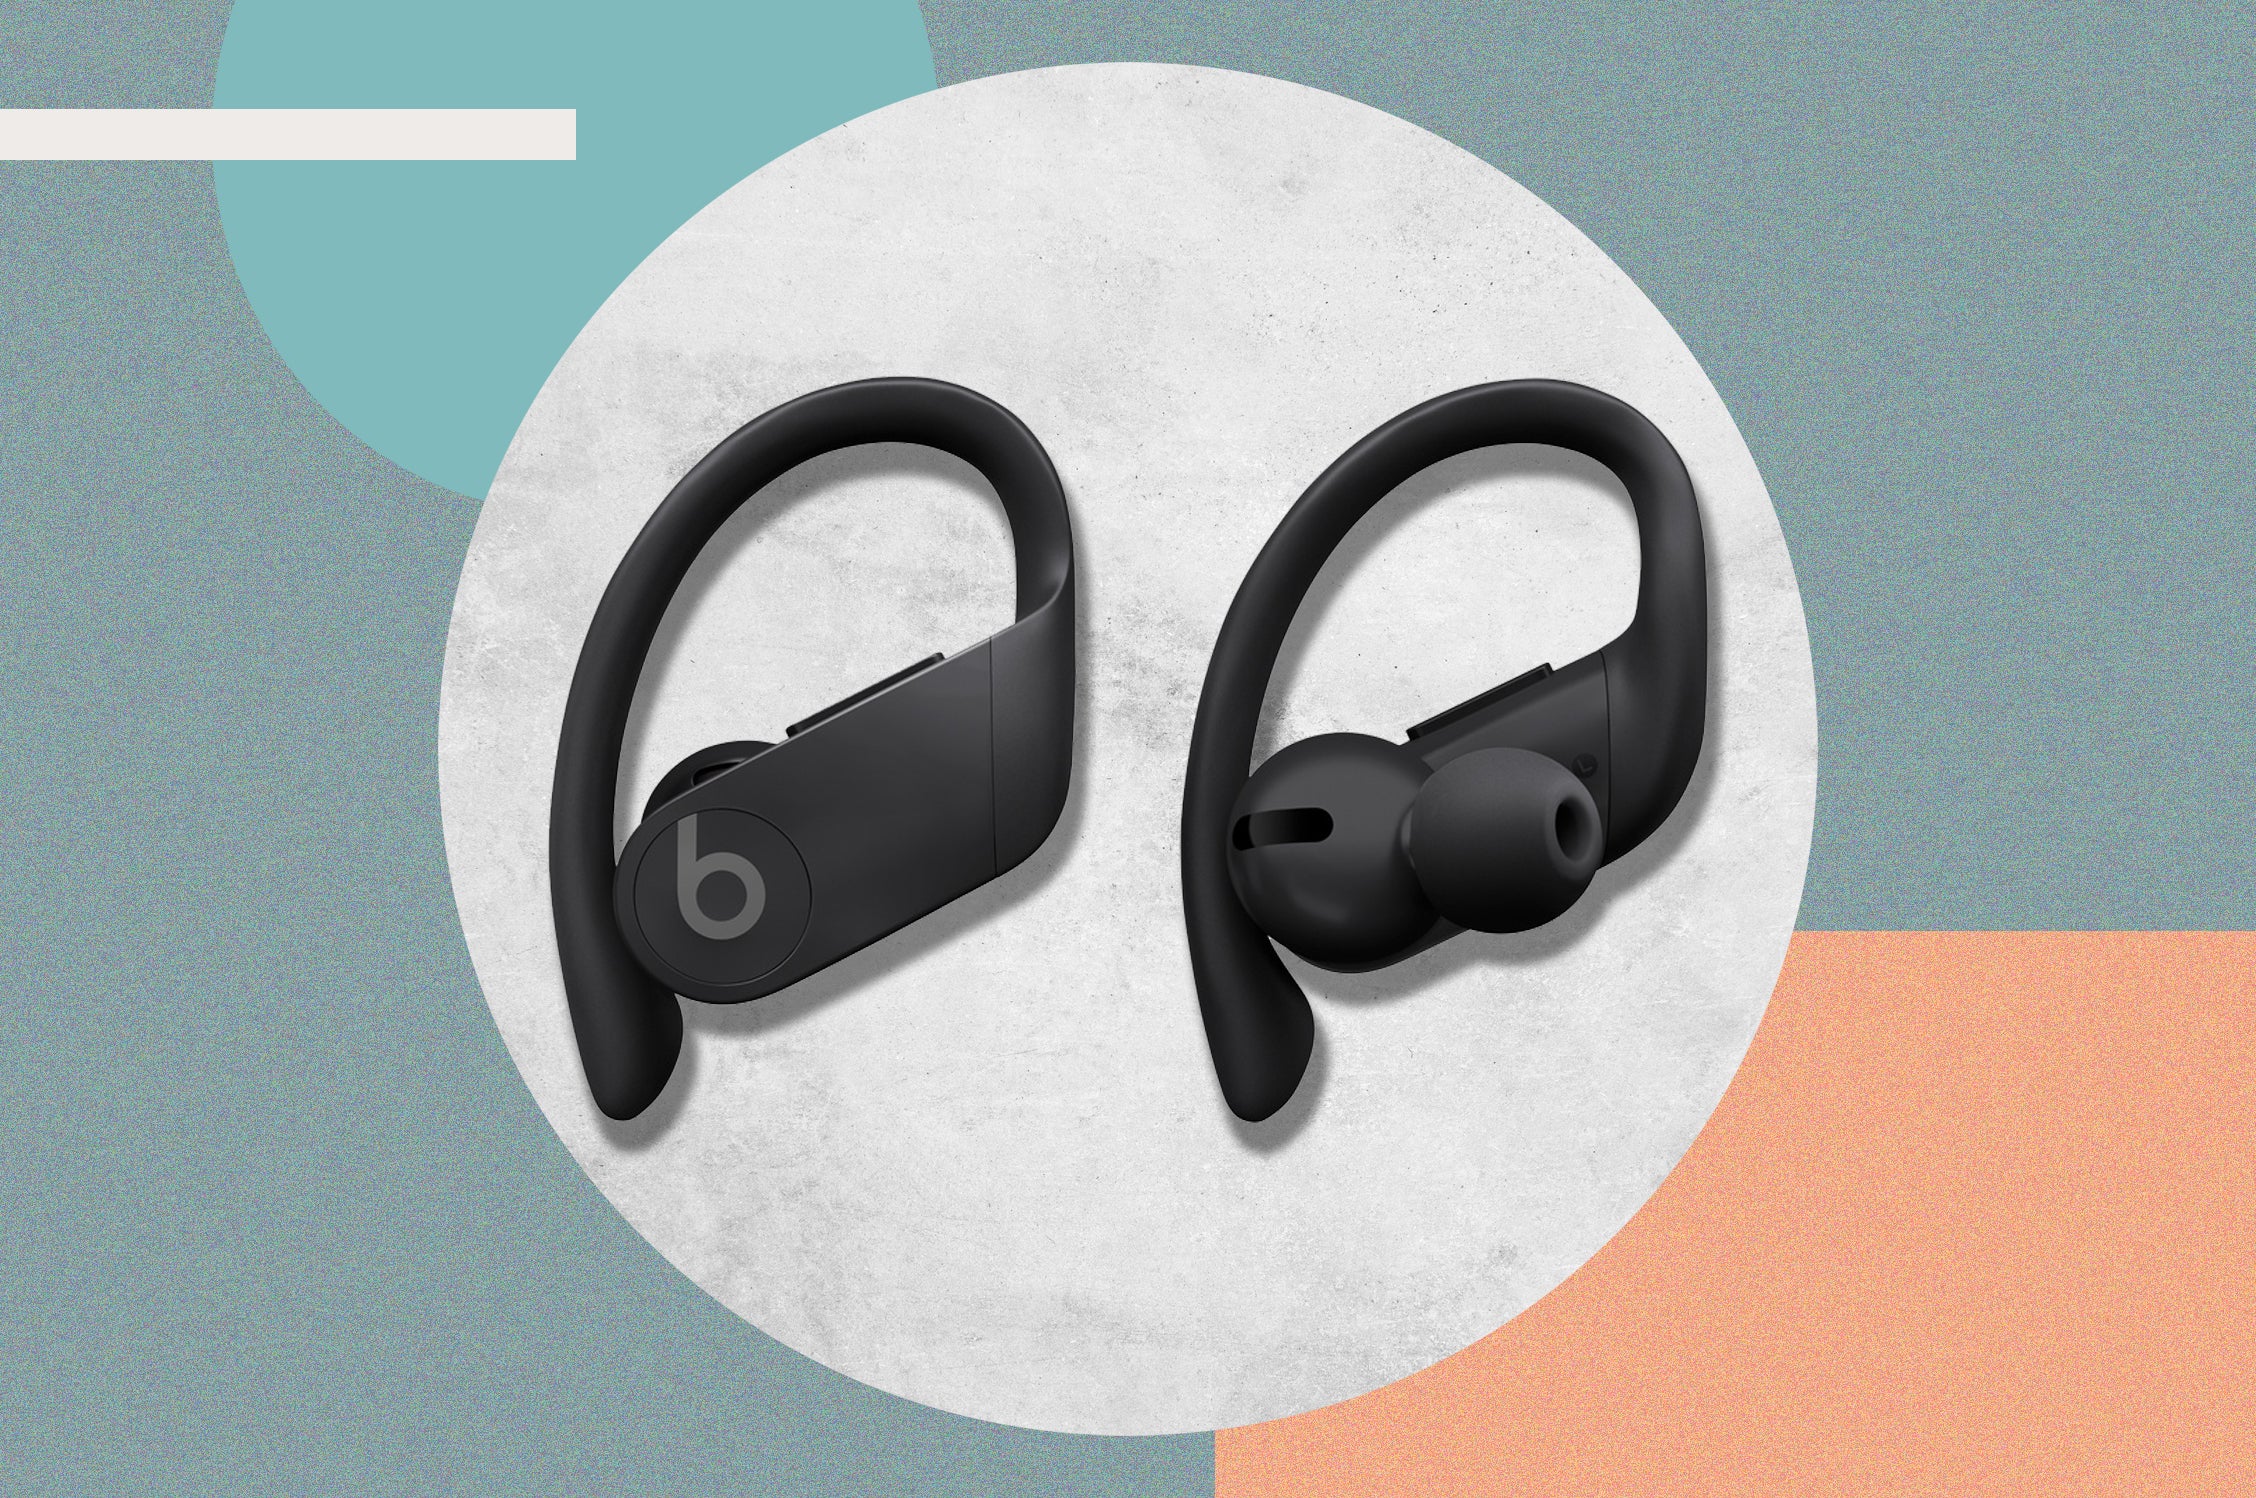 Beats Powerbeats pro review: The best Apple earbuds for